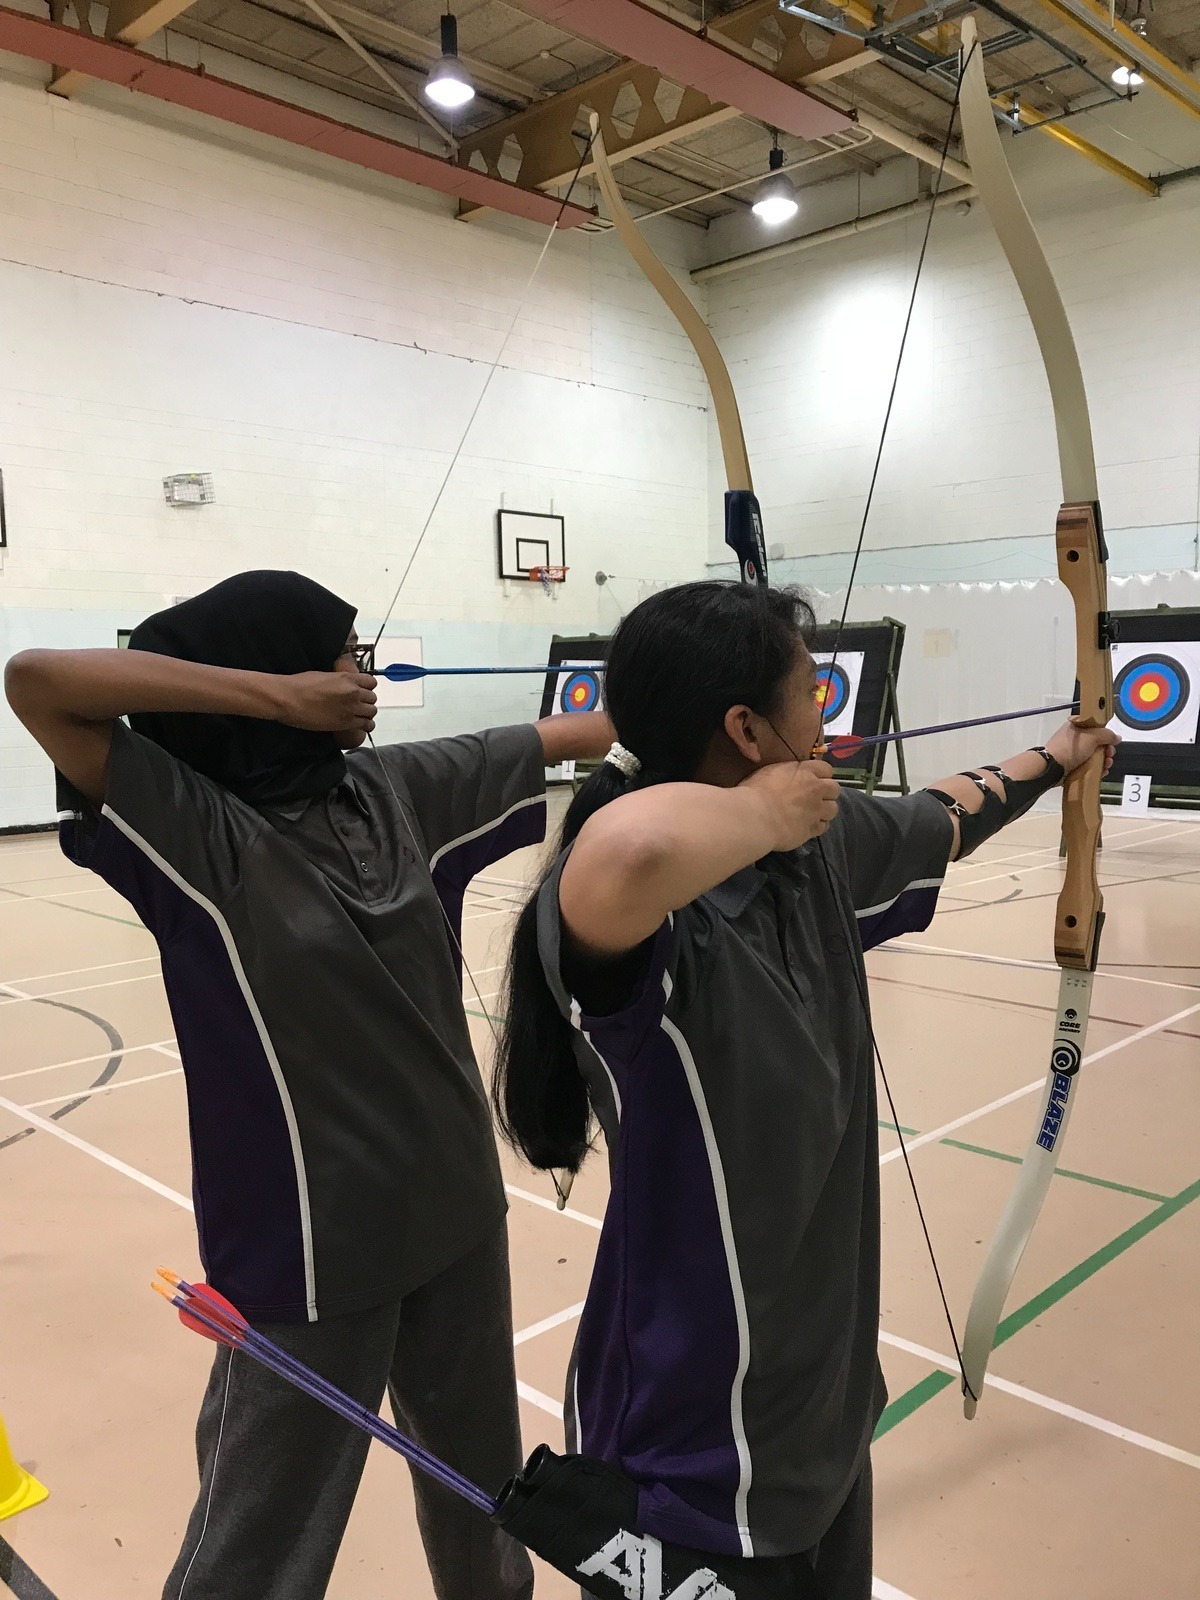 Two students doing archery in a secondary school